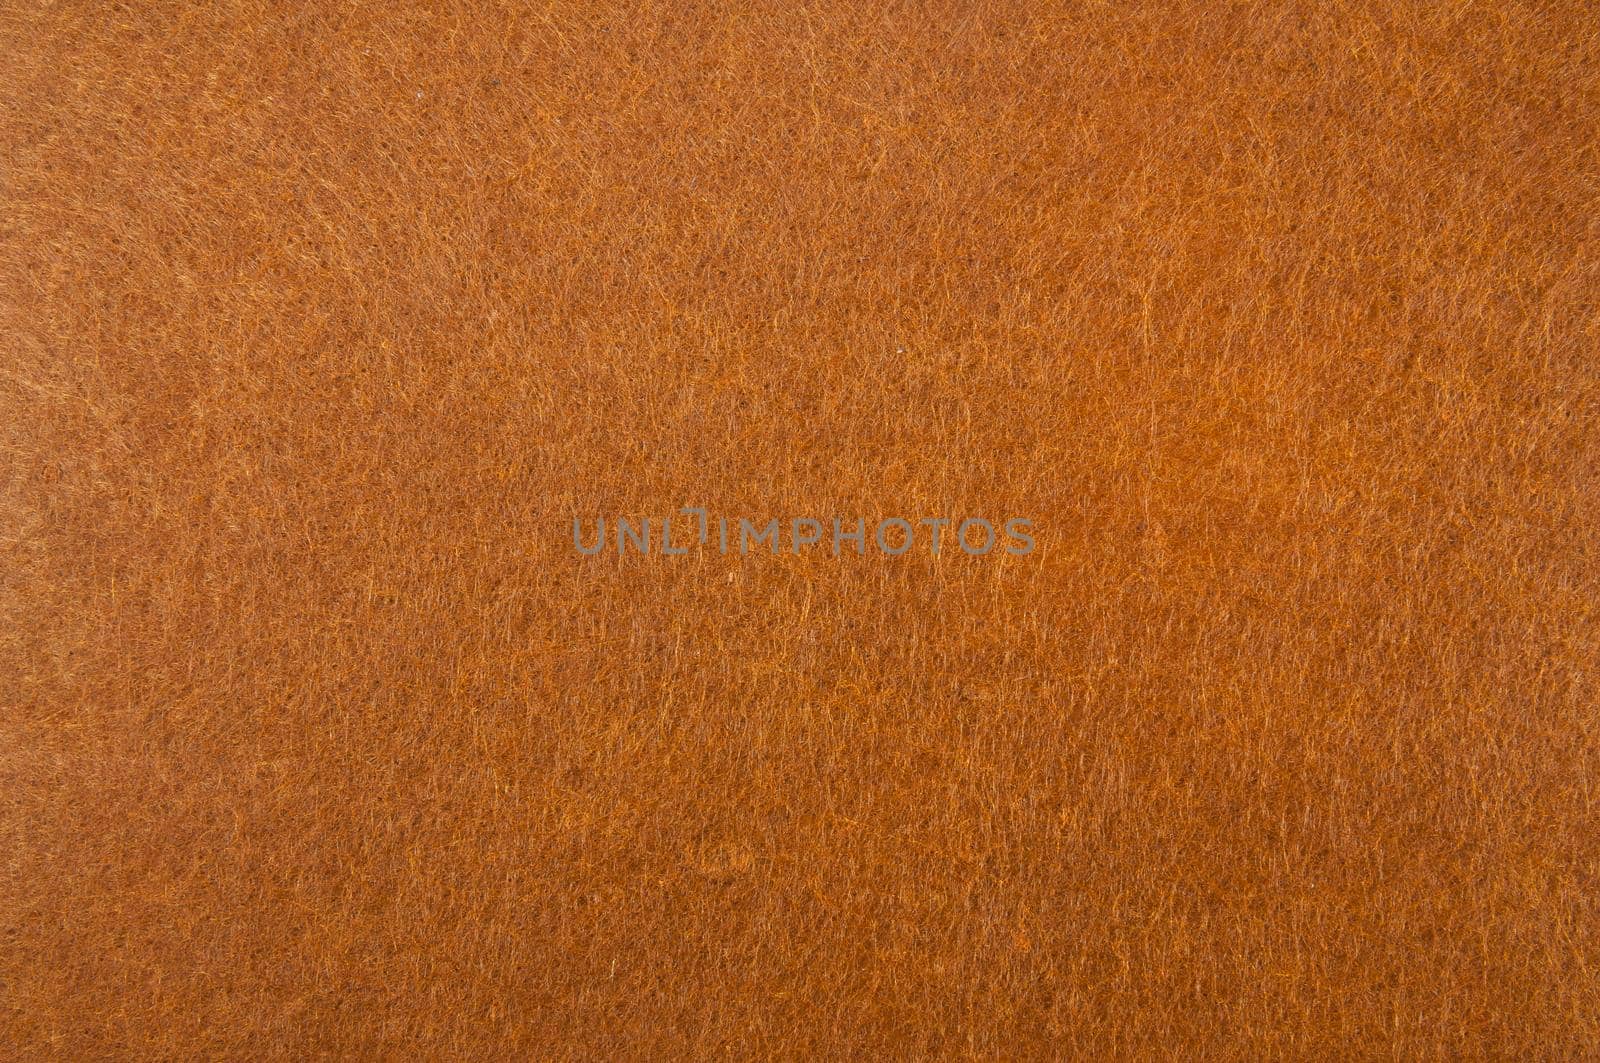 Texture background of Dark brown or Orange velvet or flannel Fabric  by thampapon